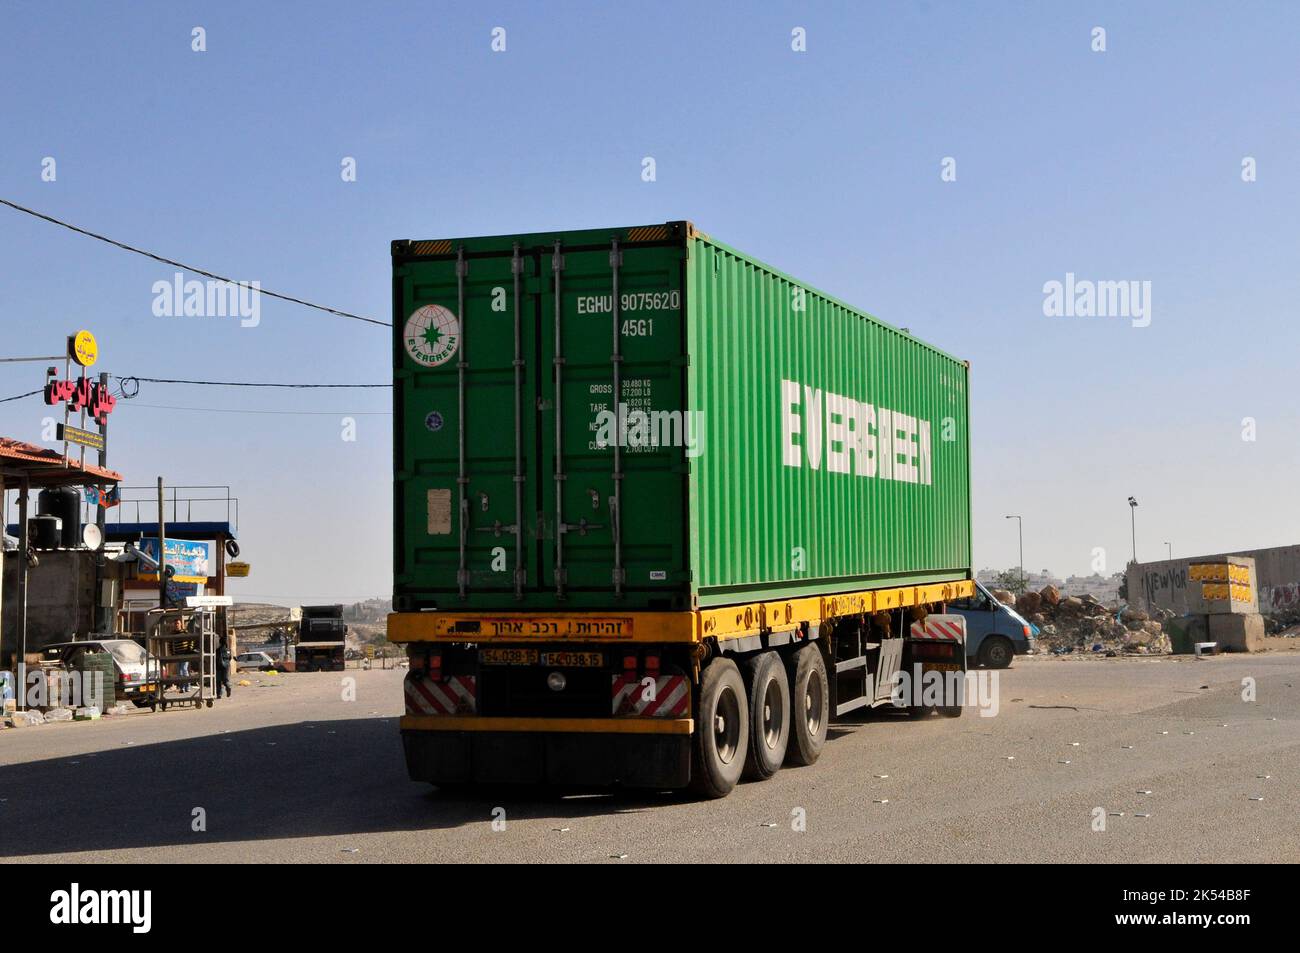 An Evergreen container truck in the West Bank near Jerusalem. Stock Photo